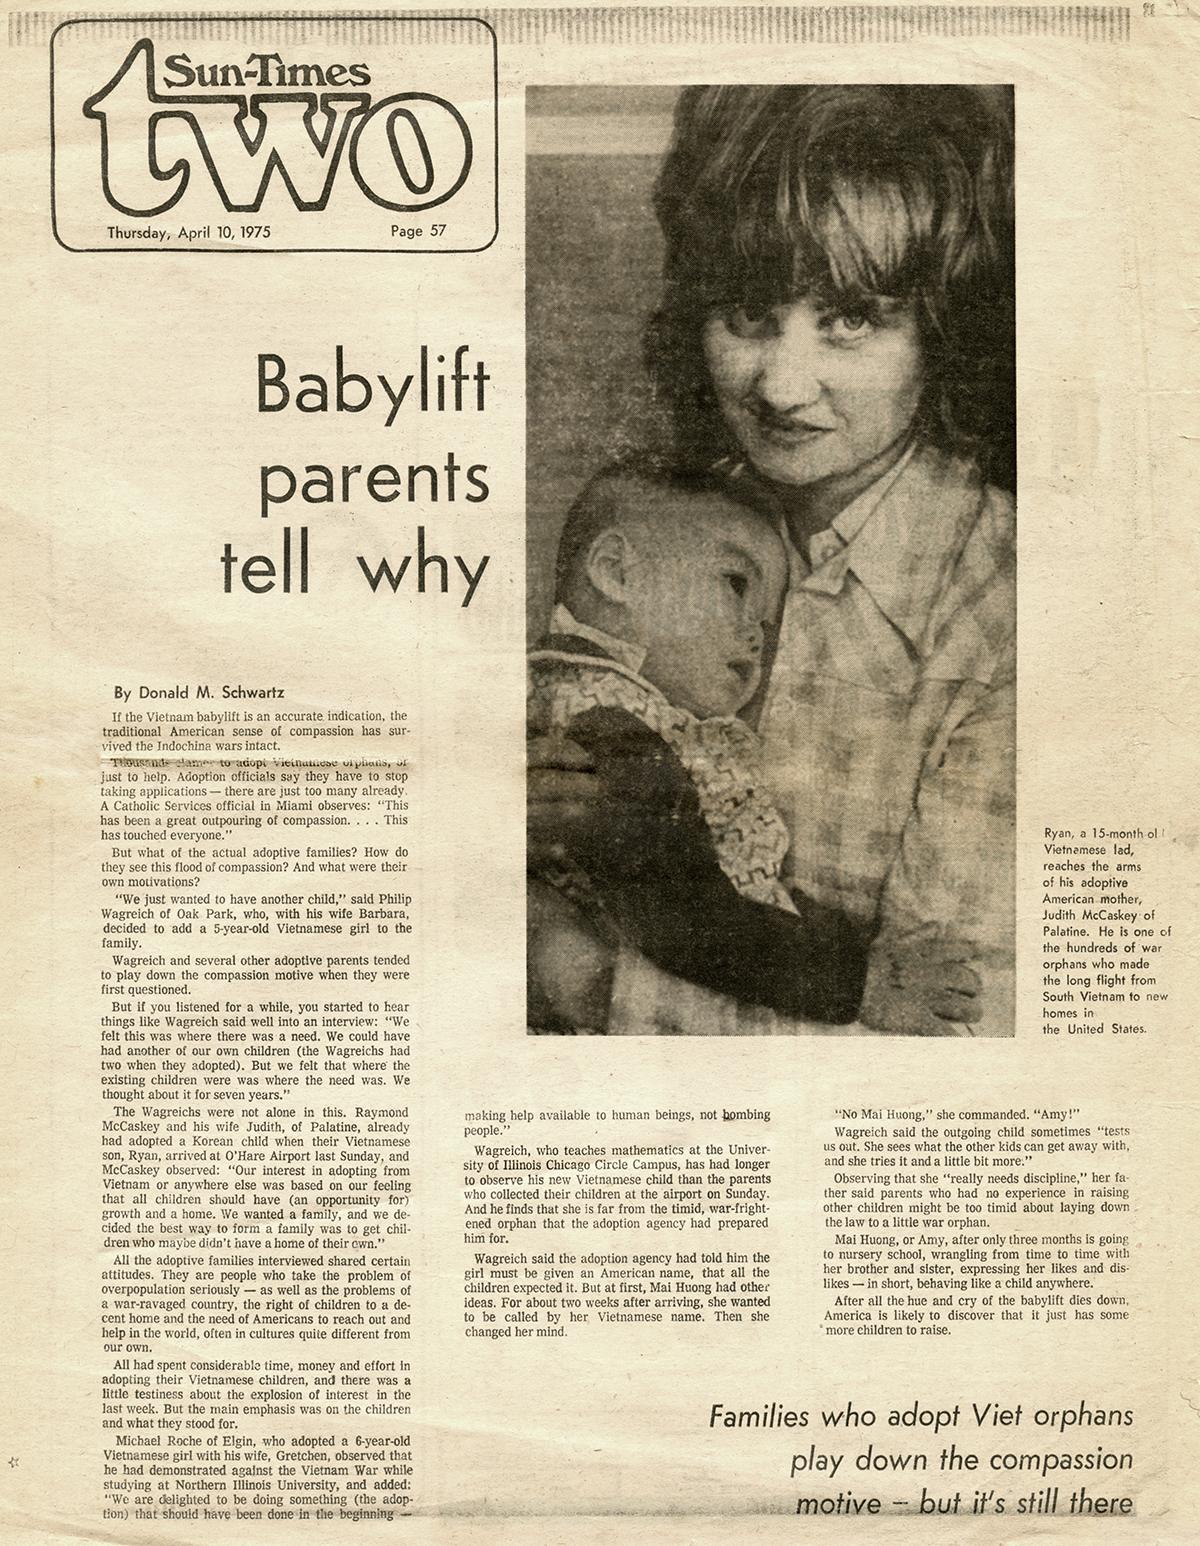 Click to read: April 10, 1975 article about McCaskey's adoption.